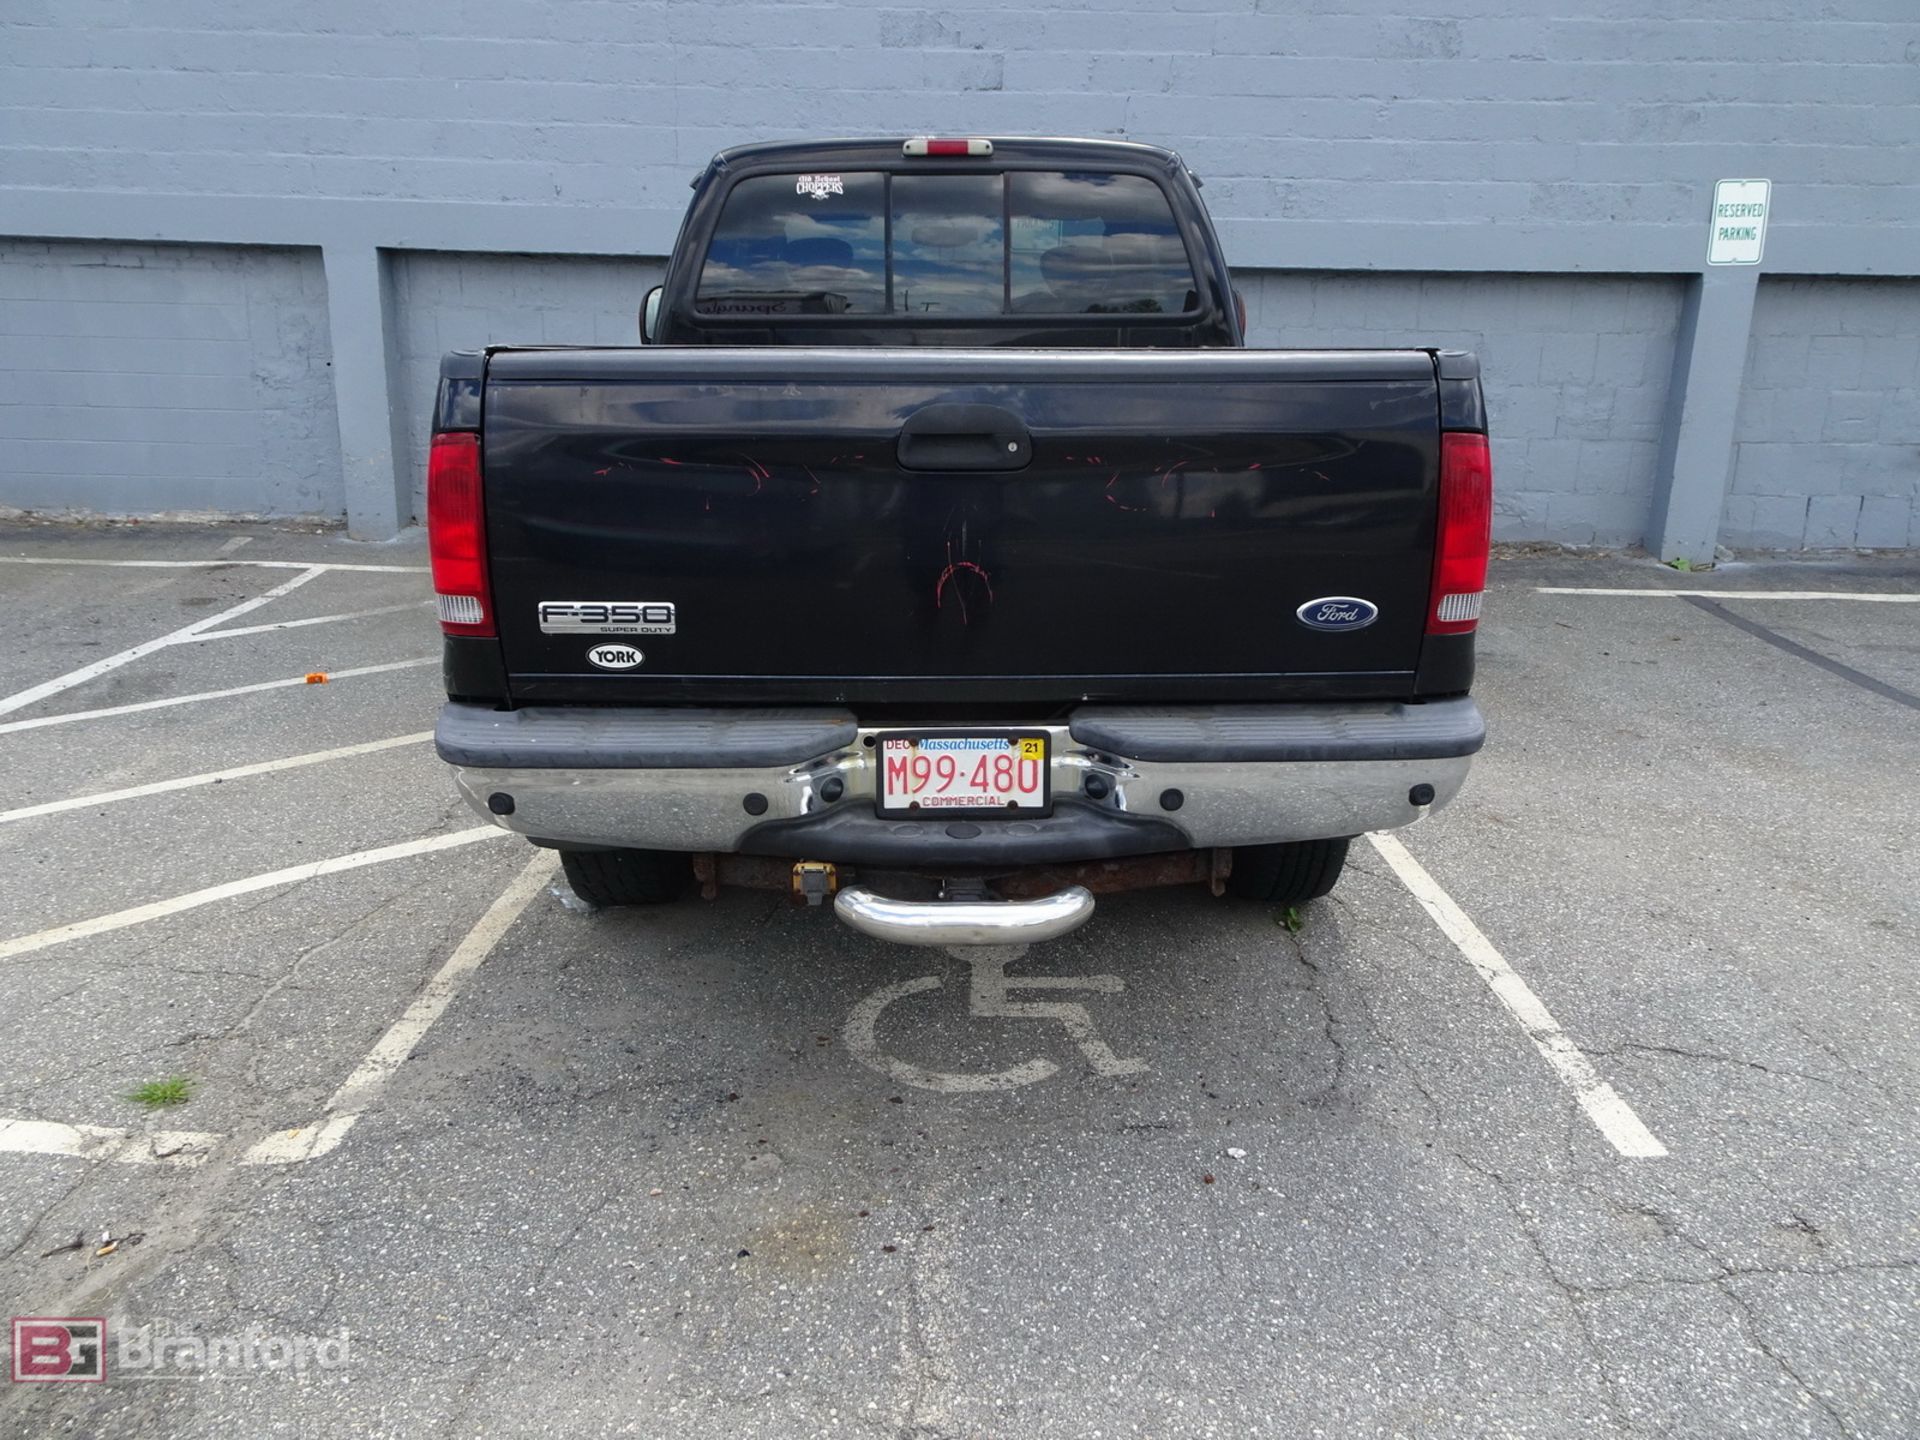 2005 Ford F-350 Pickup Truck - Image 3 of 6